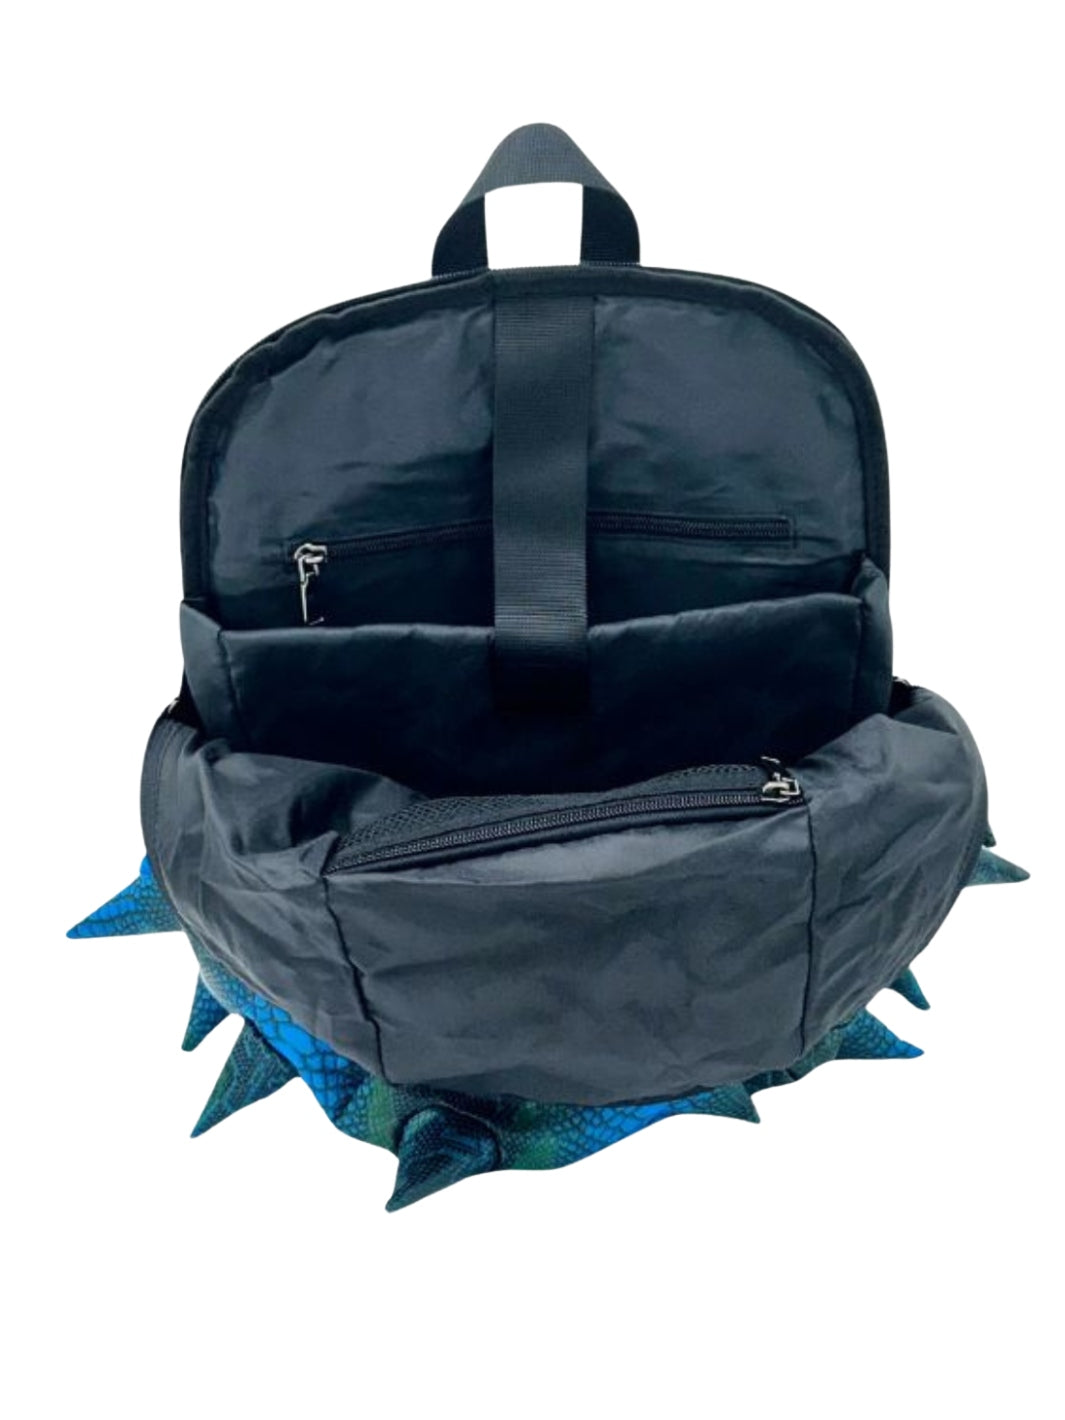 Insdie View of Blue Mamba Blue Backpack